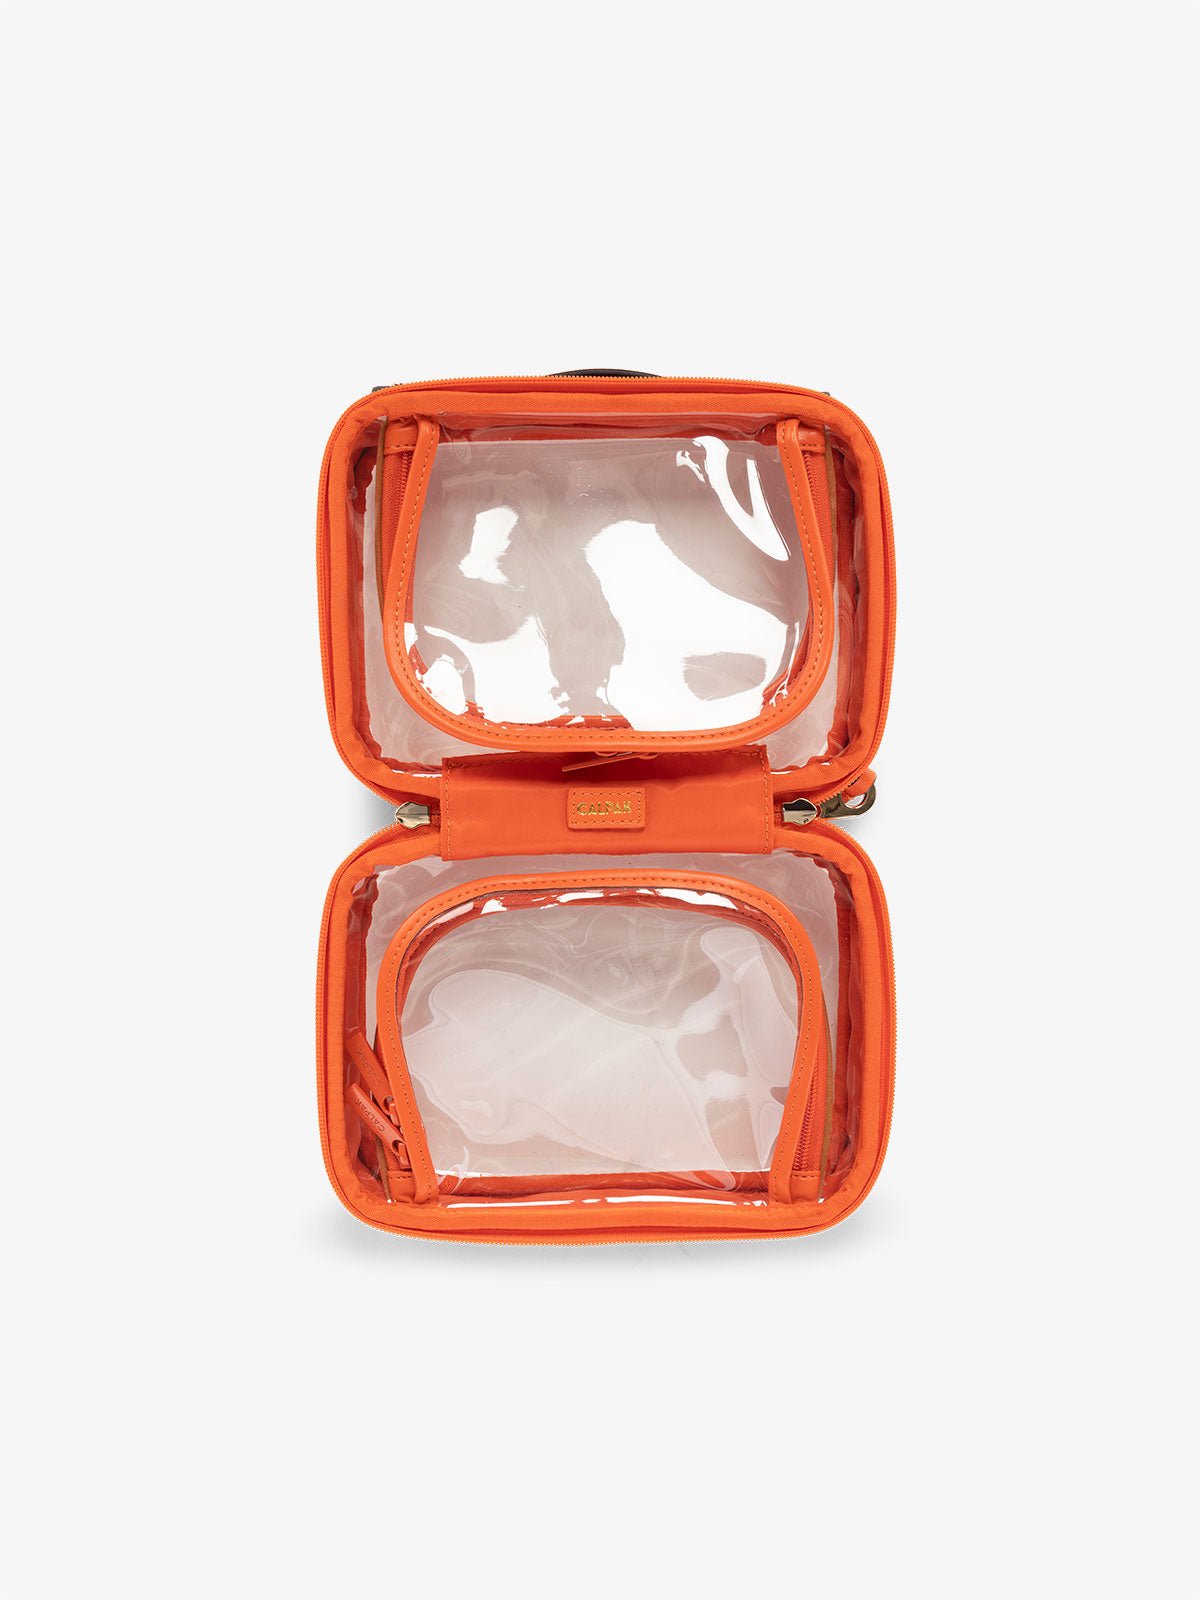 CALPAK small clear skincare bag with multiple zippered compartments in orange